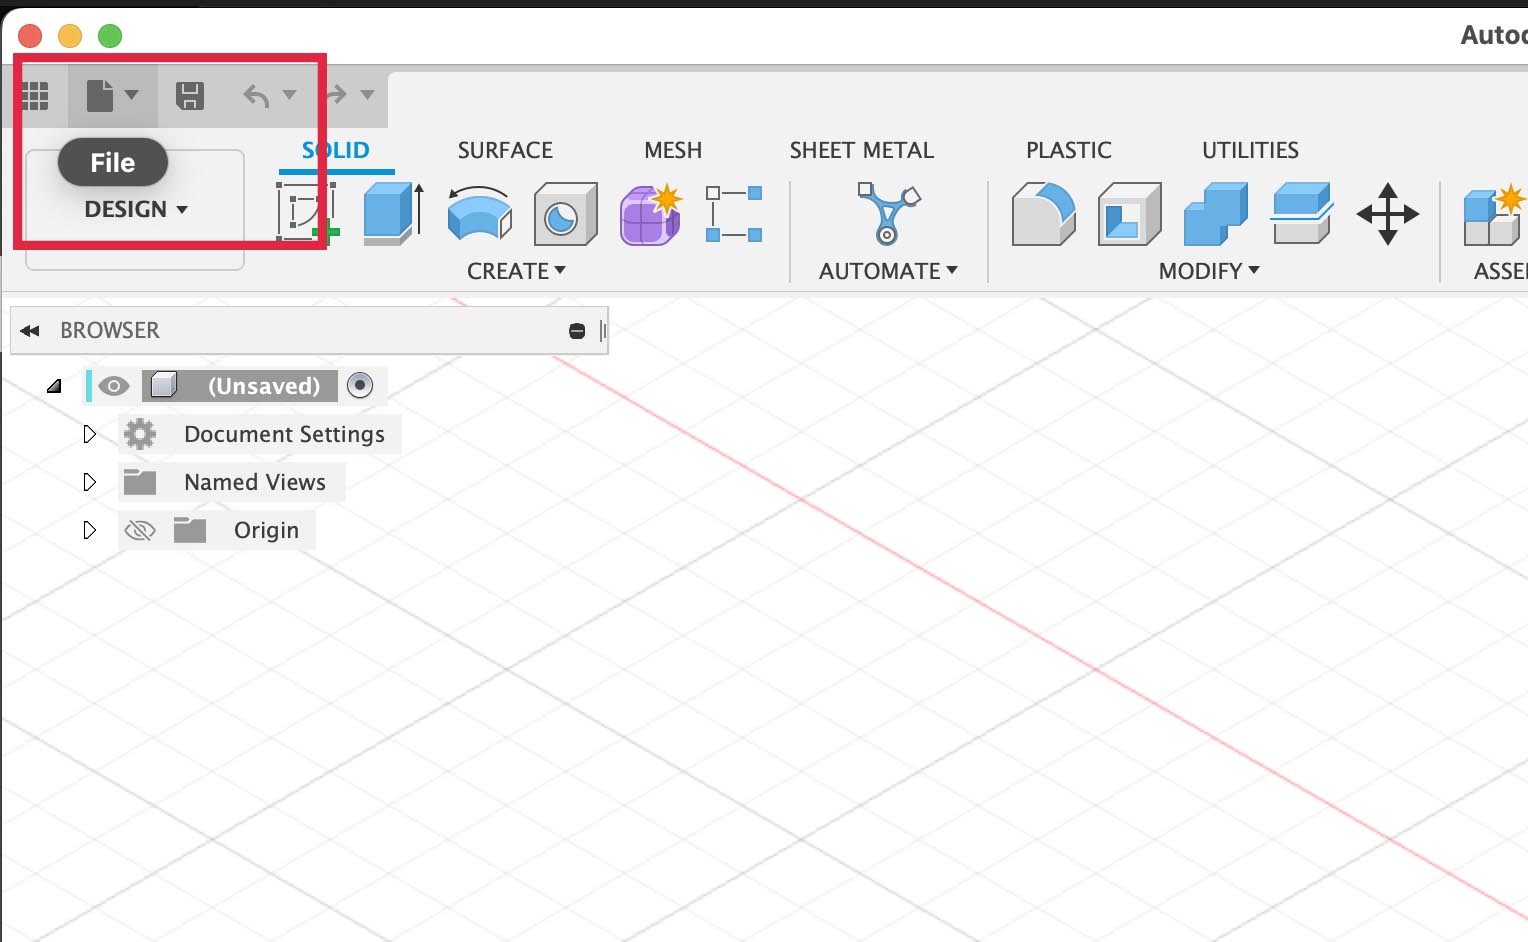 Select file from the top left Fusion 360 menu